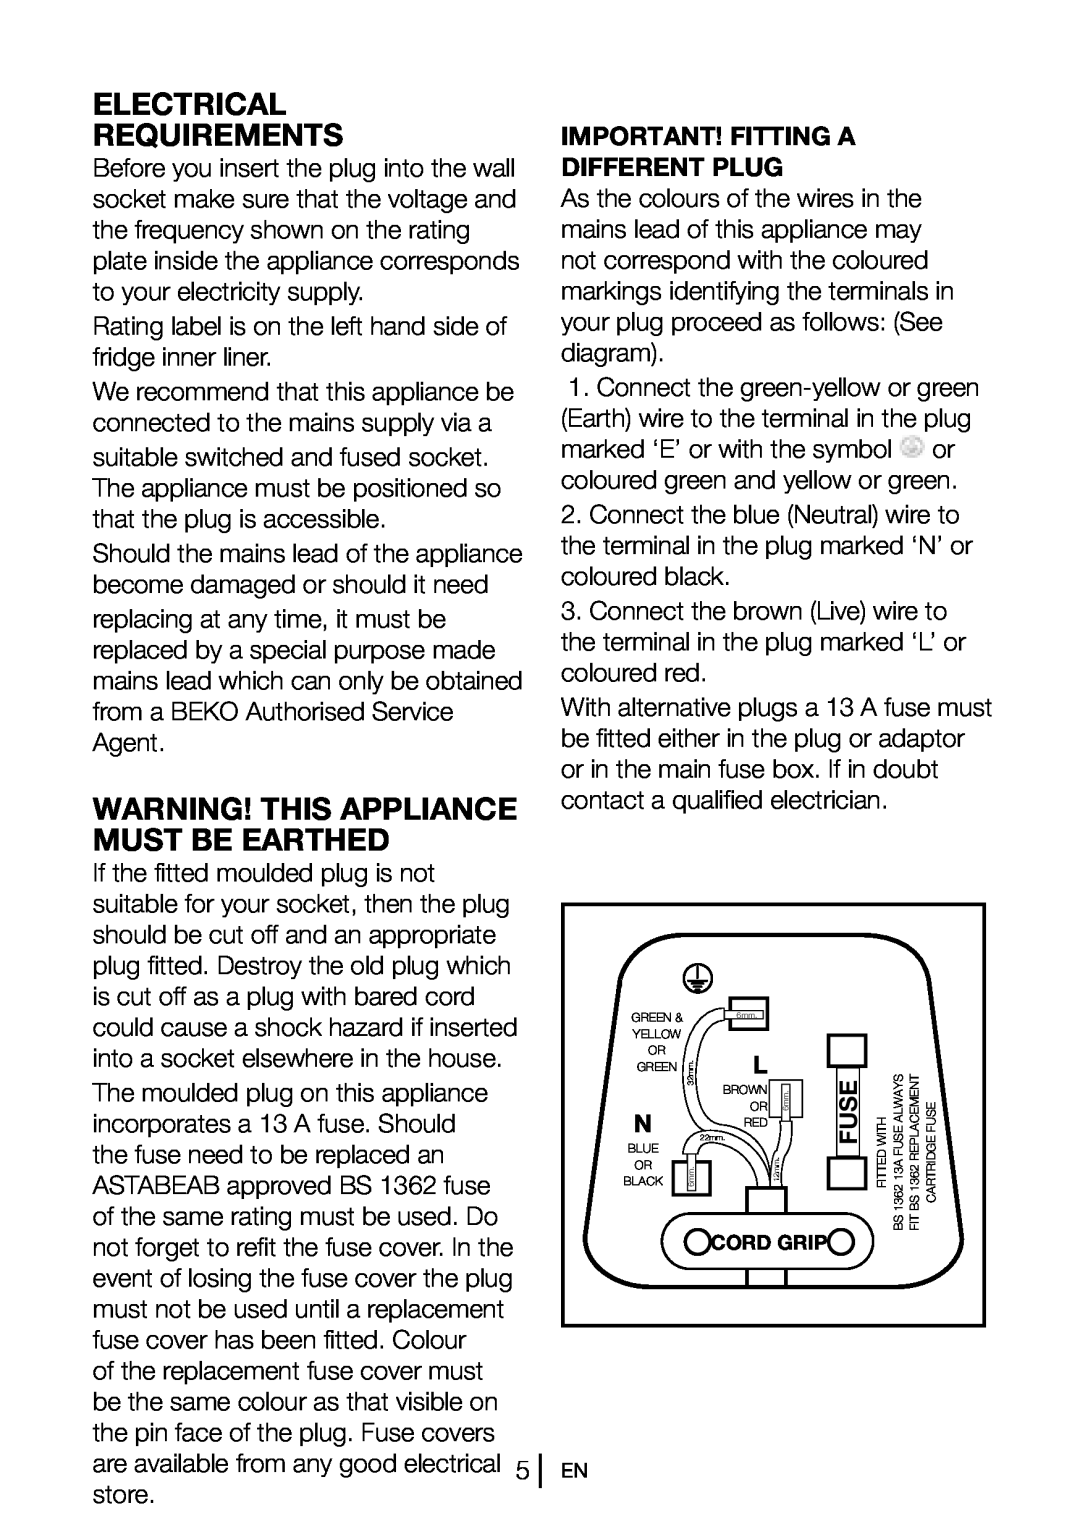 Beko CF5834APS Electrical Requirements, Warning! This Appliance Must Be Earthed, Important! Fitting A Different Plug, Fuse 